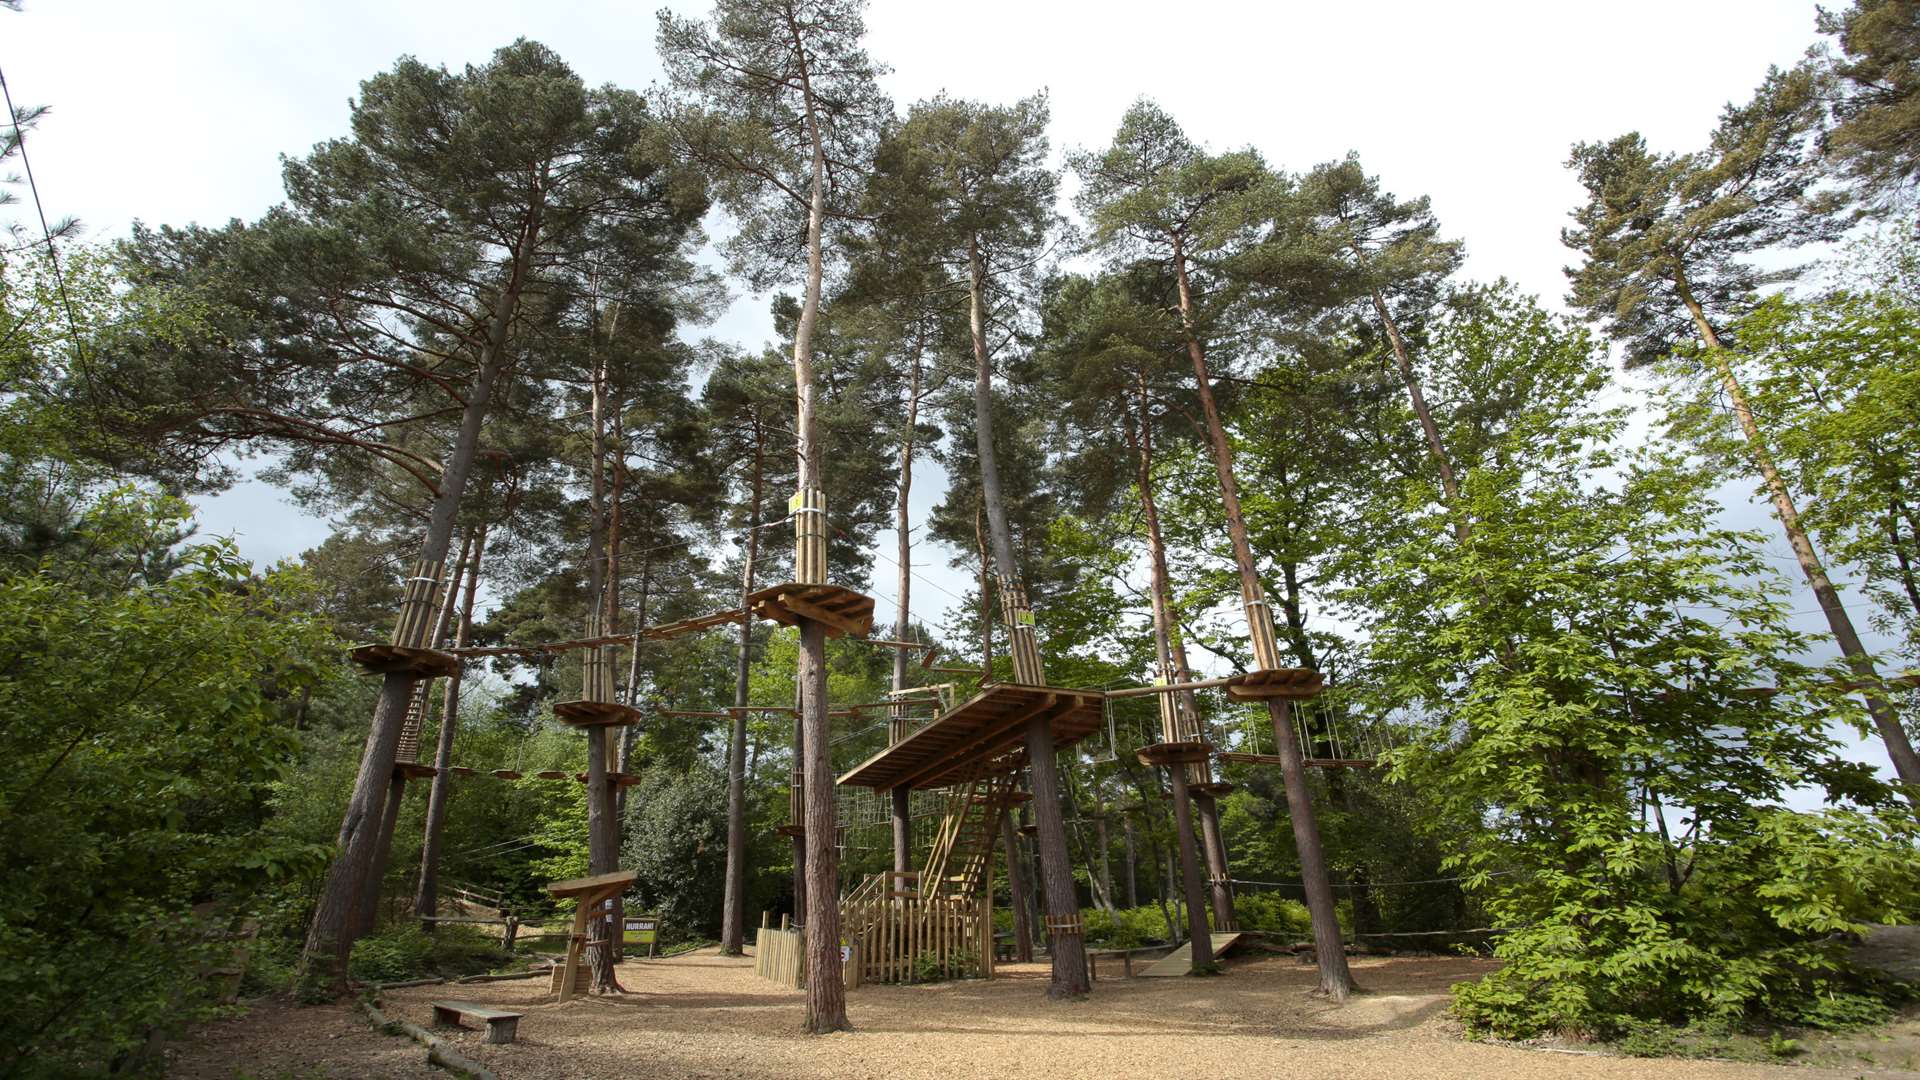 Love is in the air at Go Ape, Bedgebury